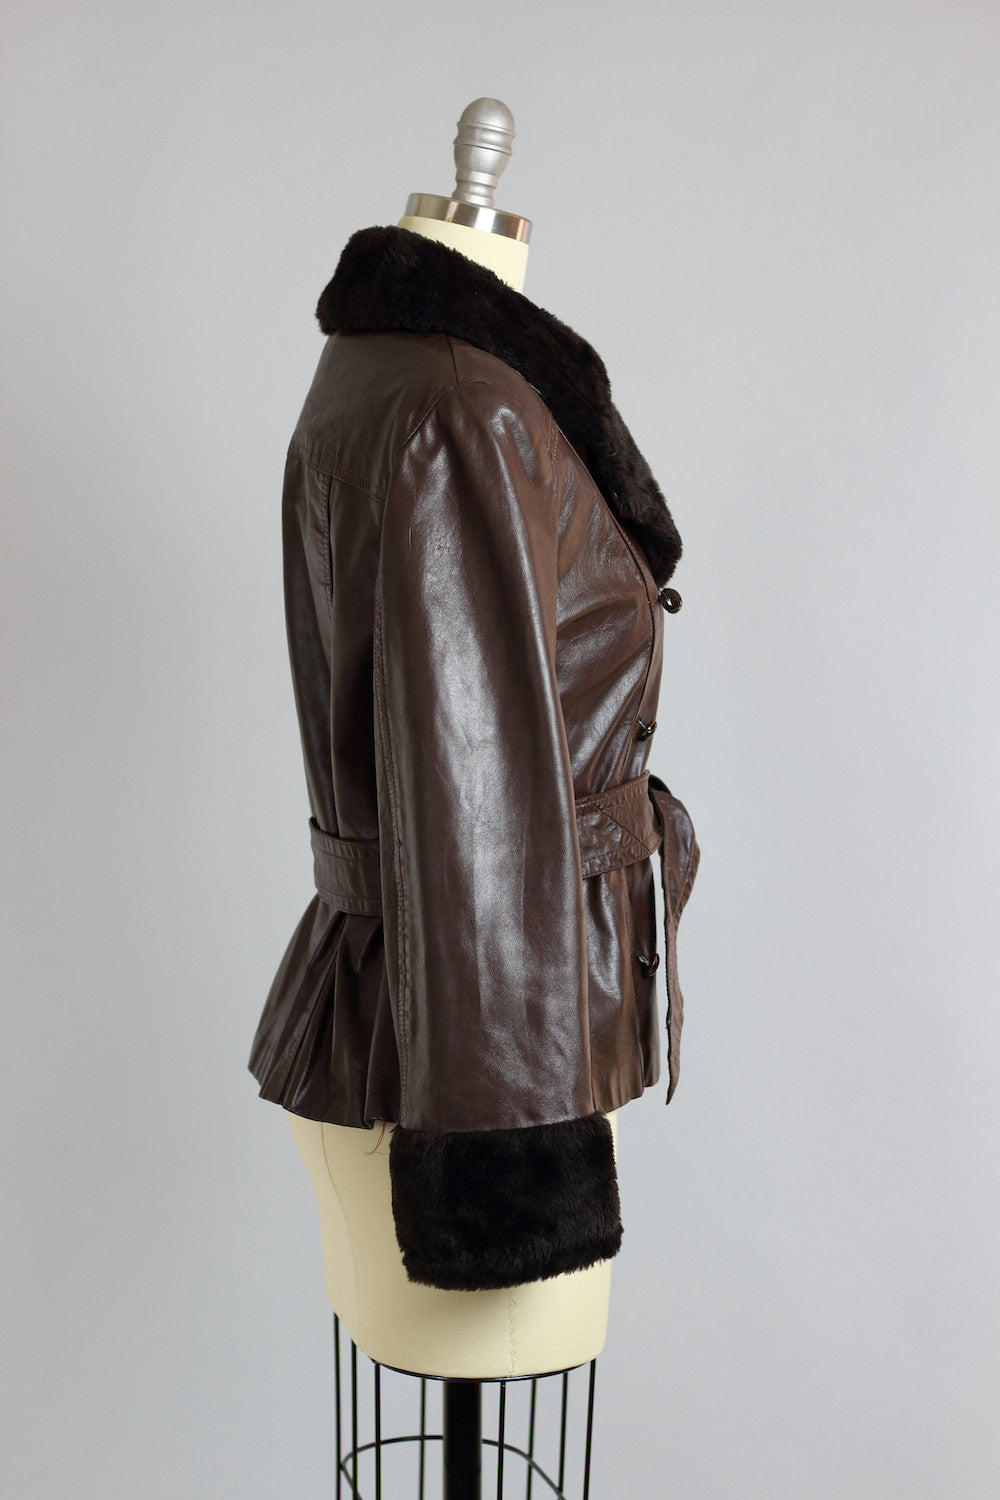 1960s Brown Leather Moto Jacket with Fur Collar